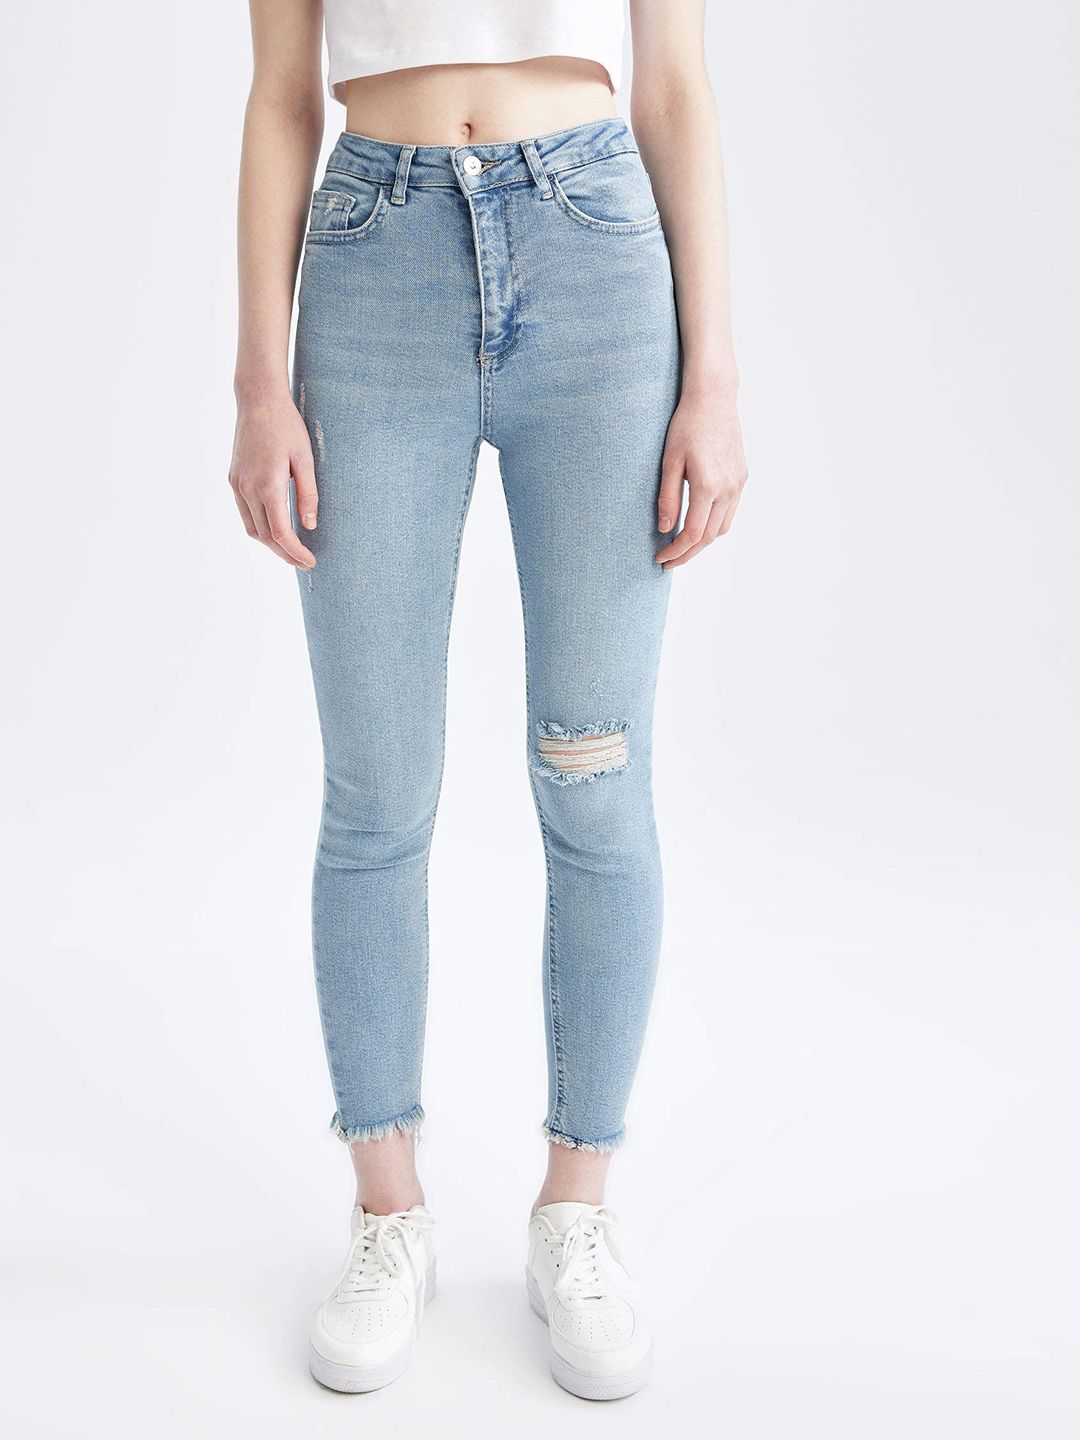 DeFacto Women Blue Skinny Fit Mildly Distressed Light Fade Stretchable Jeans Price in India